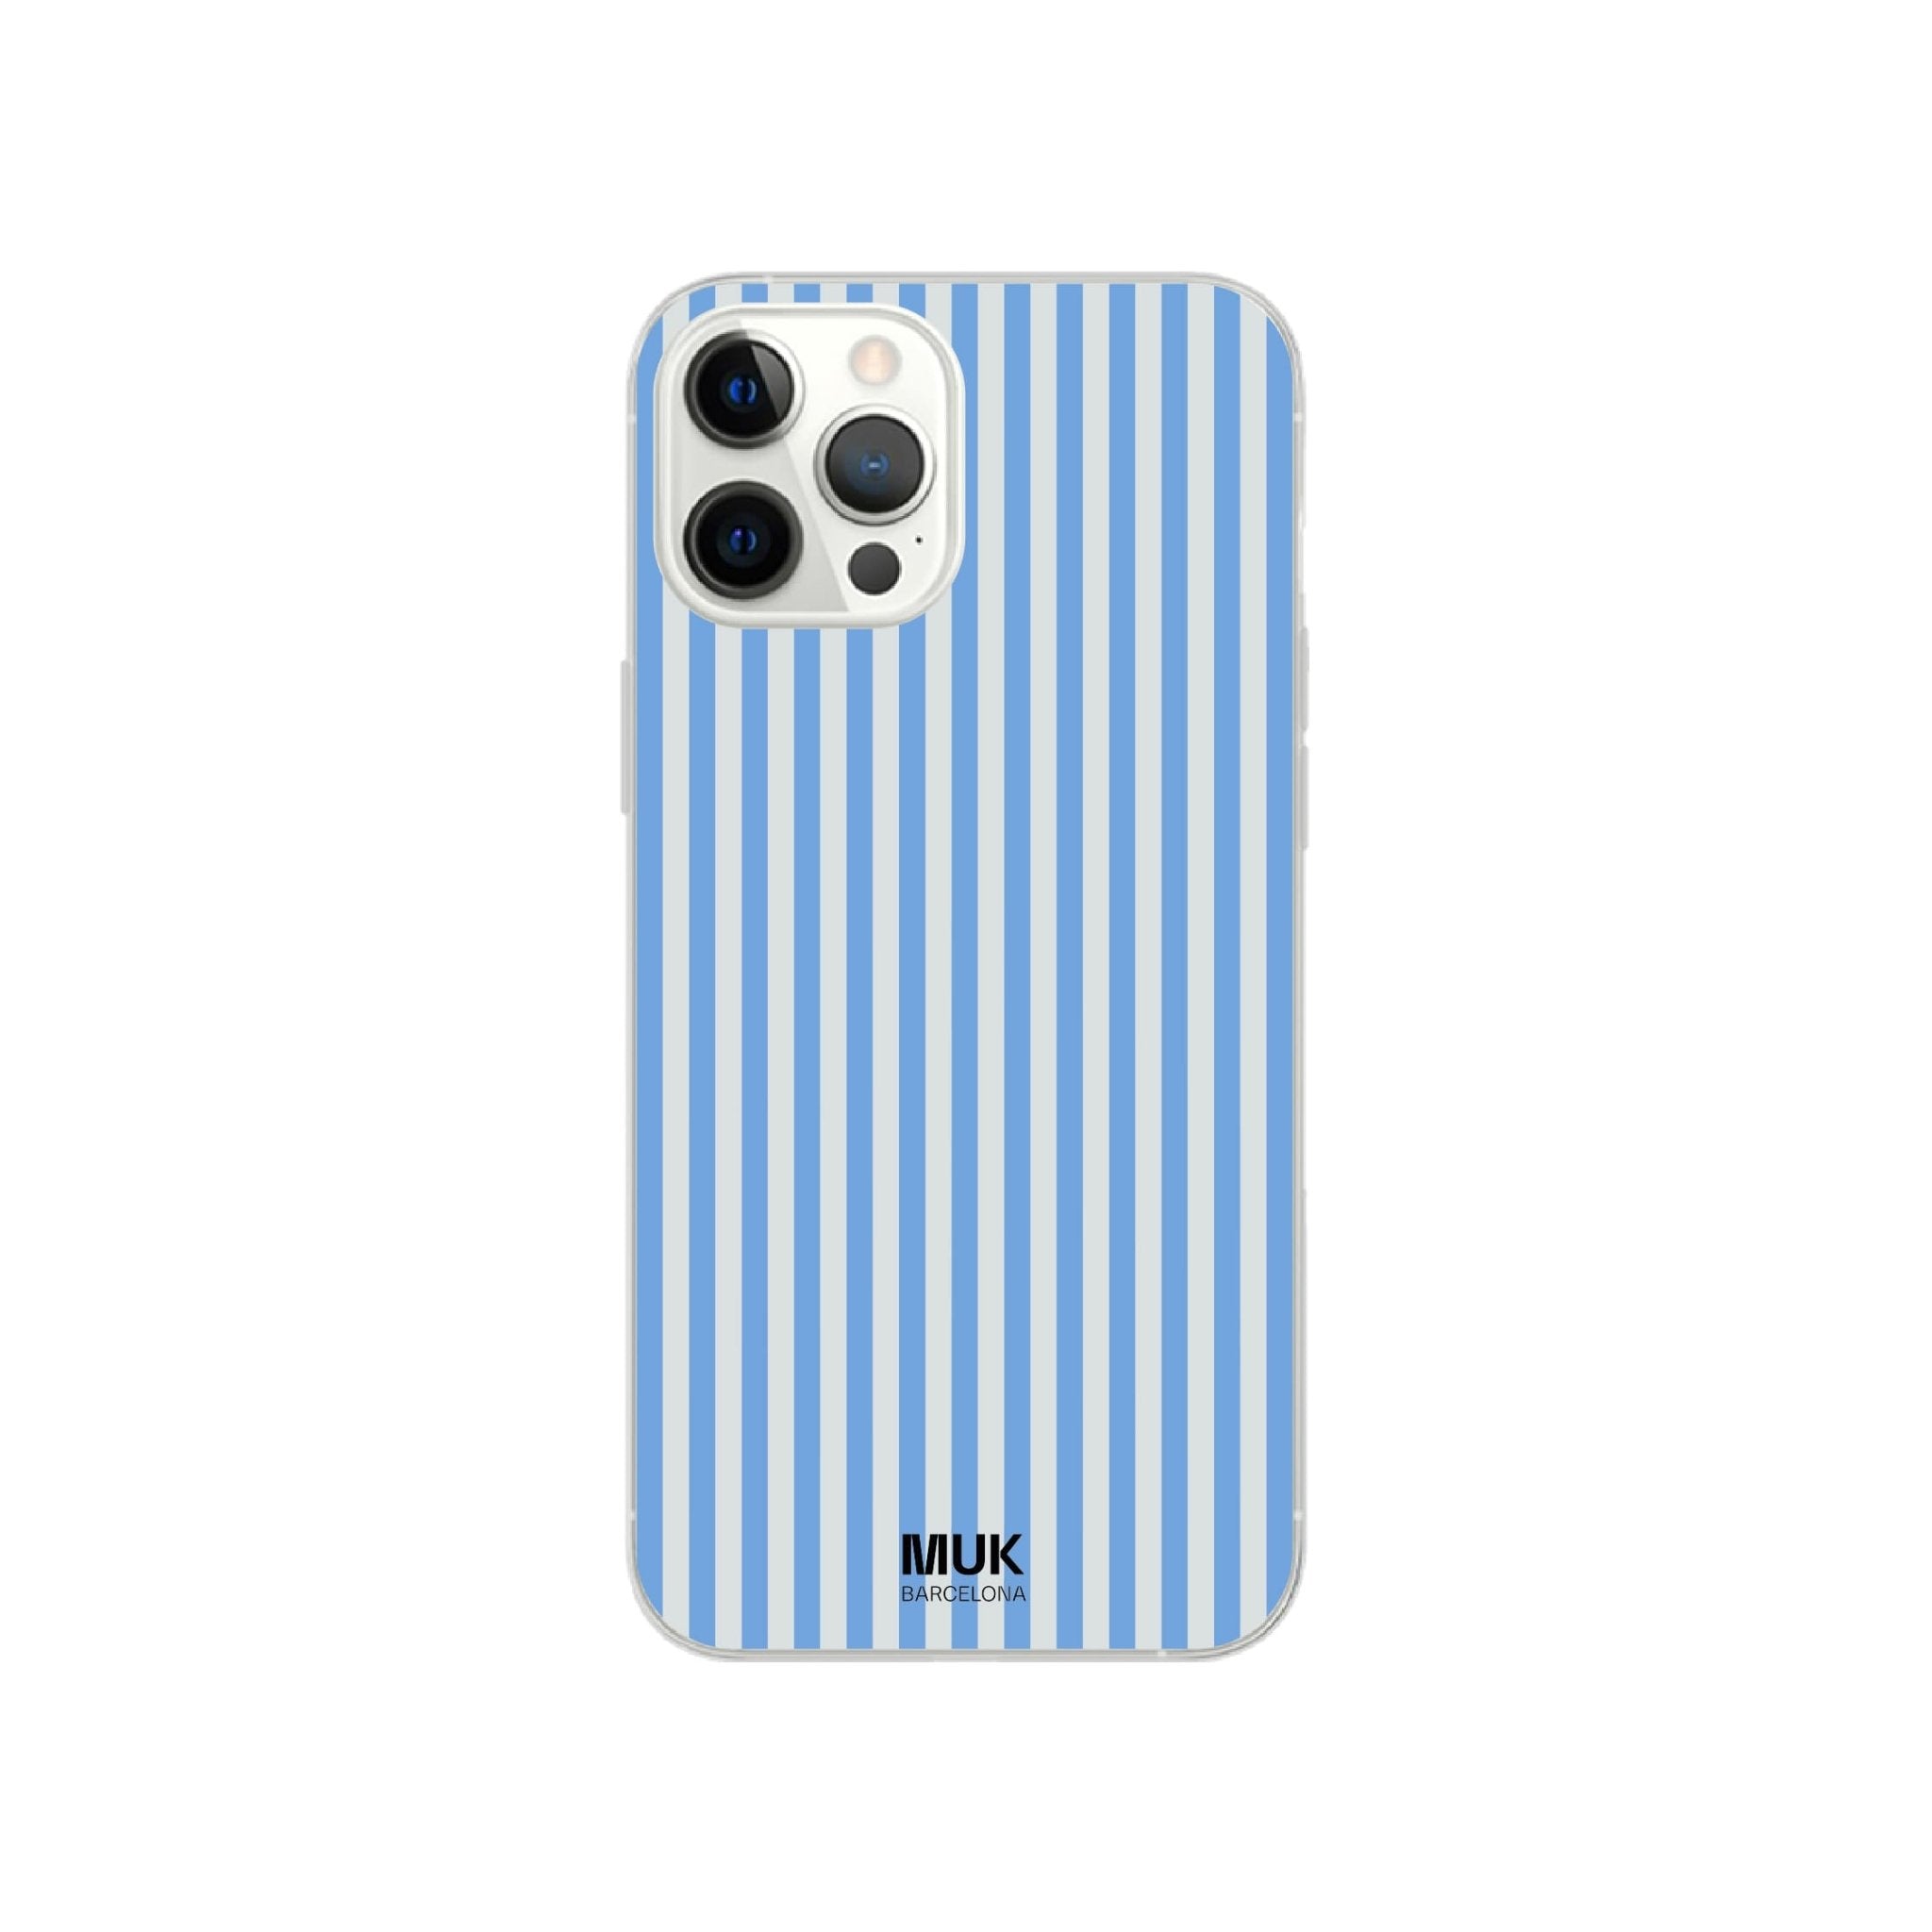 Clear phone case with blue stripes in sailor style.
